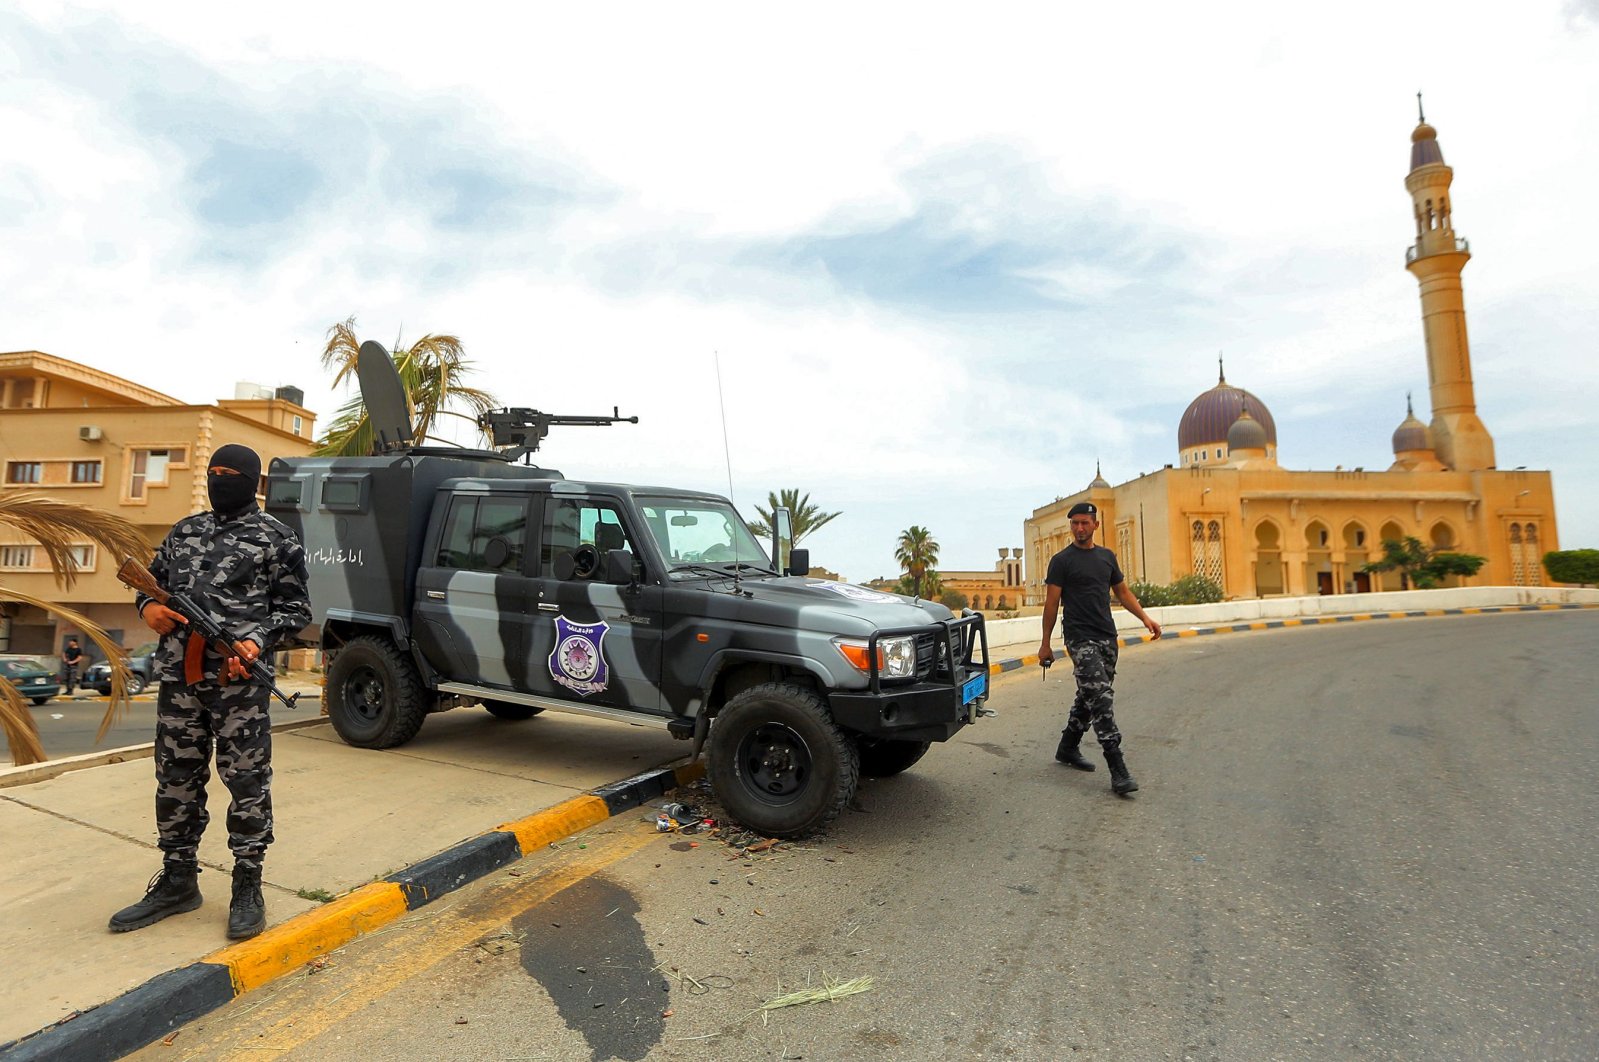 Members of security forces affiliated with the Libyan Government of National Accord's (GNA) Interior Ministry stand at a makeshift checkpoint in the town of Tarhuna, about 65 kilometers southeast of the capital Tripoli, Libya, June 11, 2020. (AFP Photo)